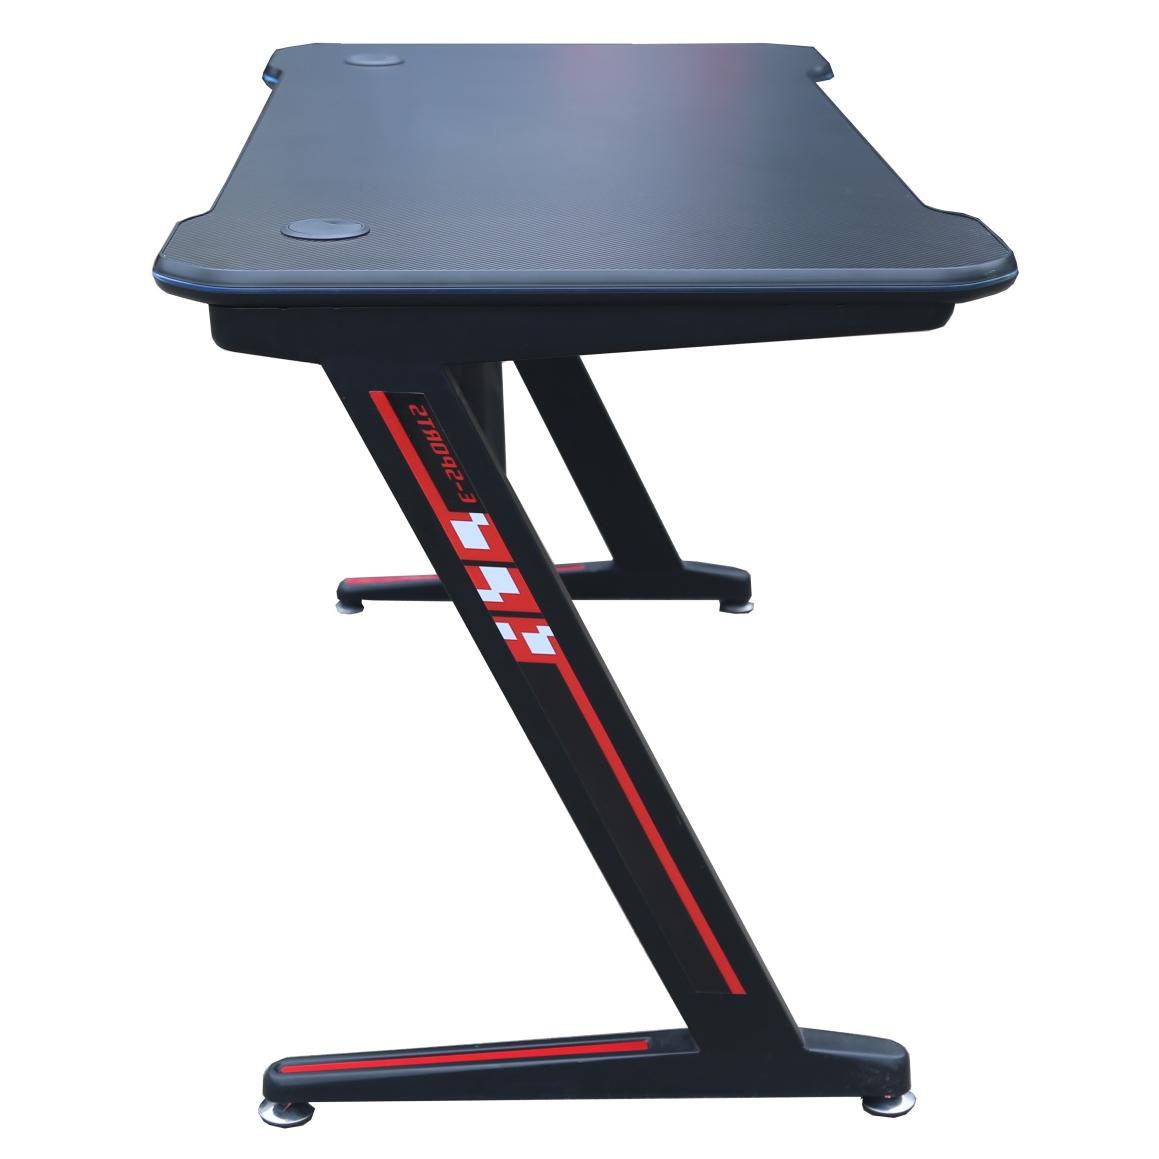 ViscoLogic Gaming Desk Computer Table Z- Shape Sports Racing Table with LED Lights